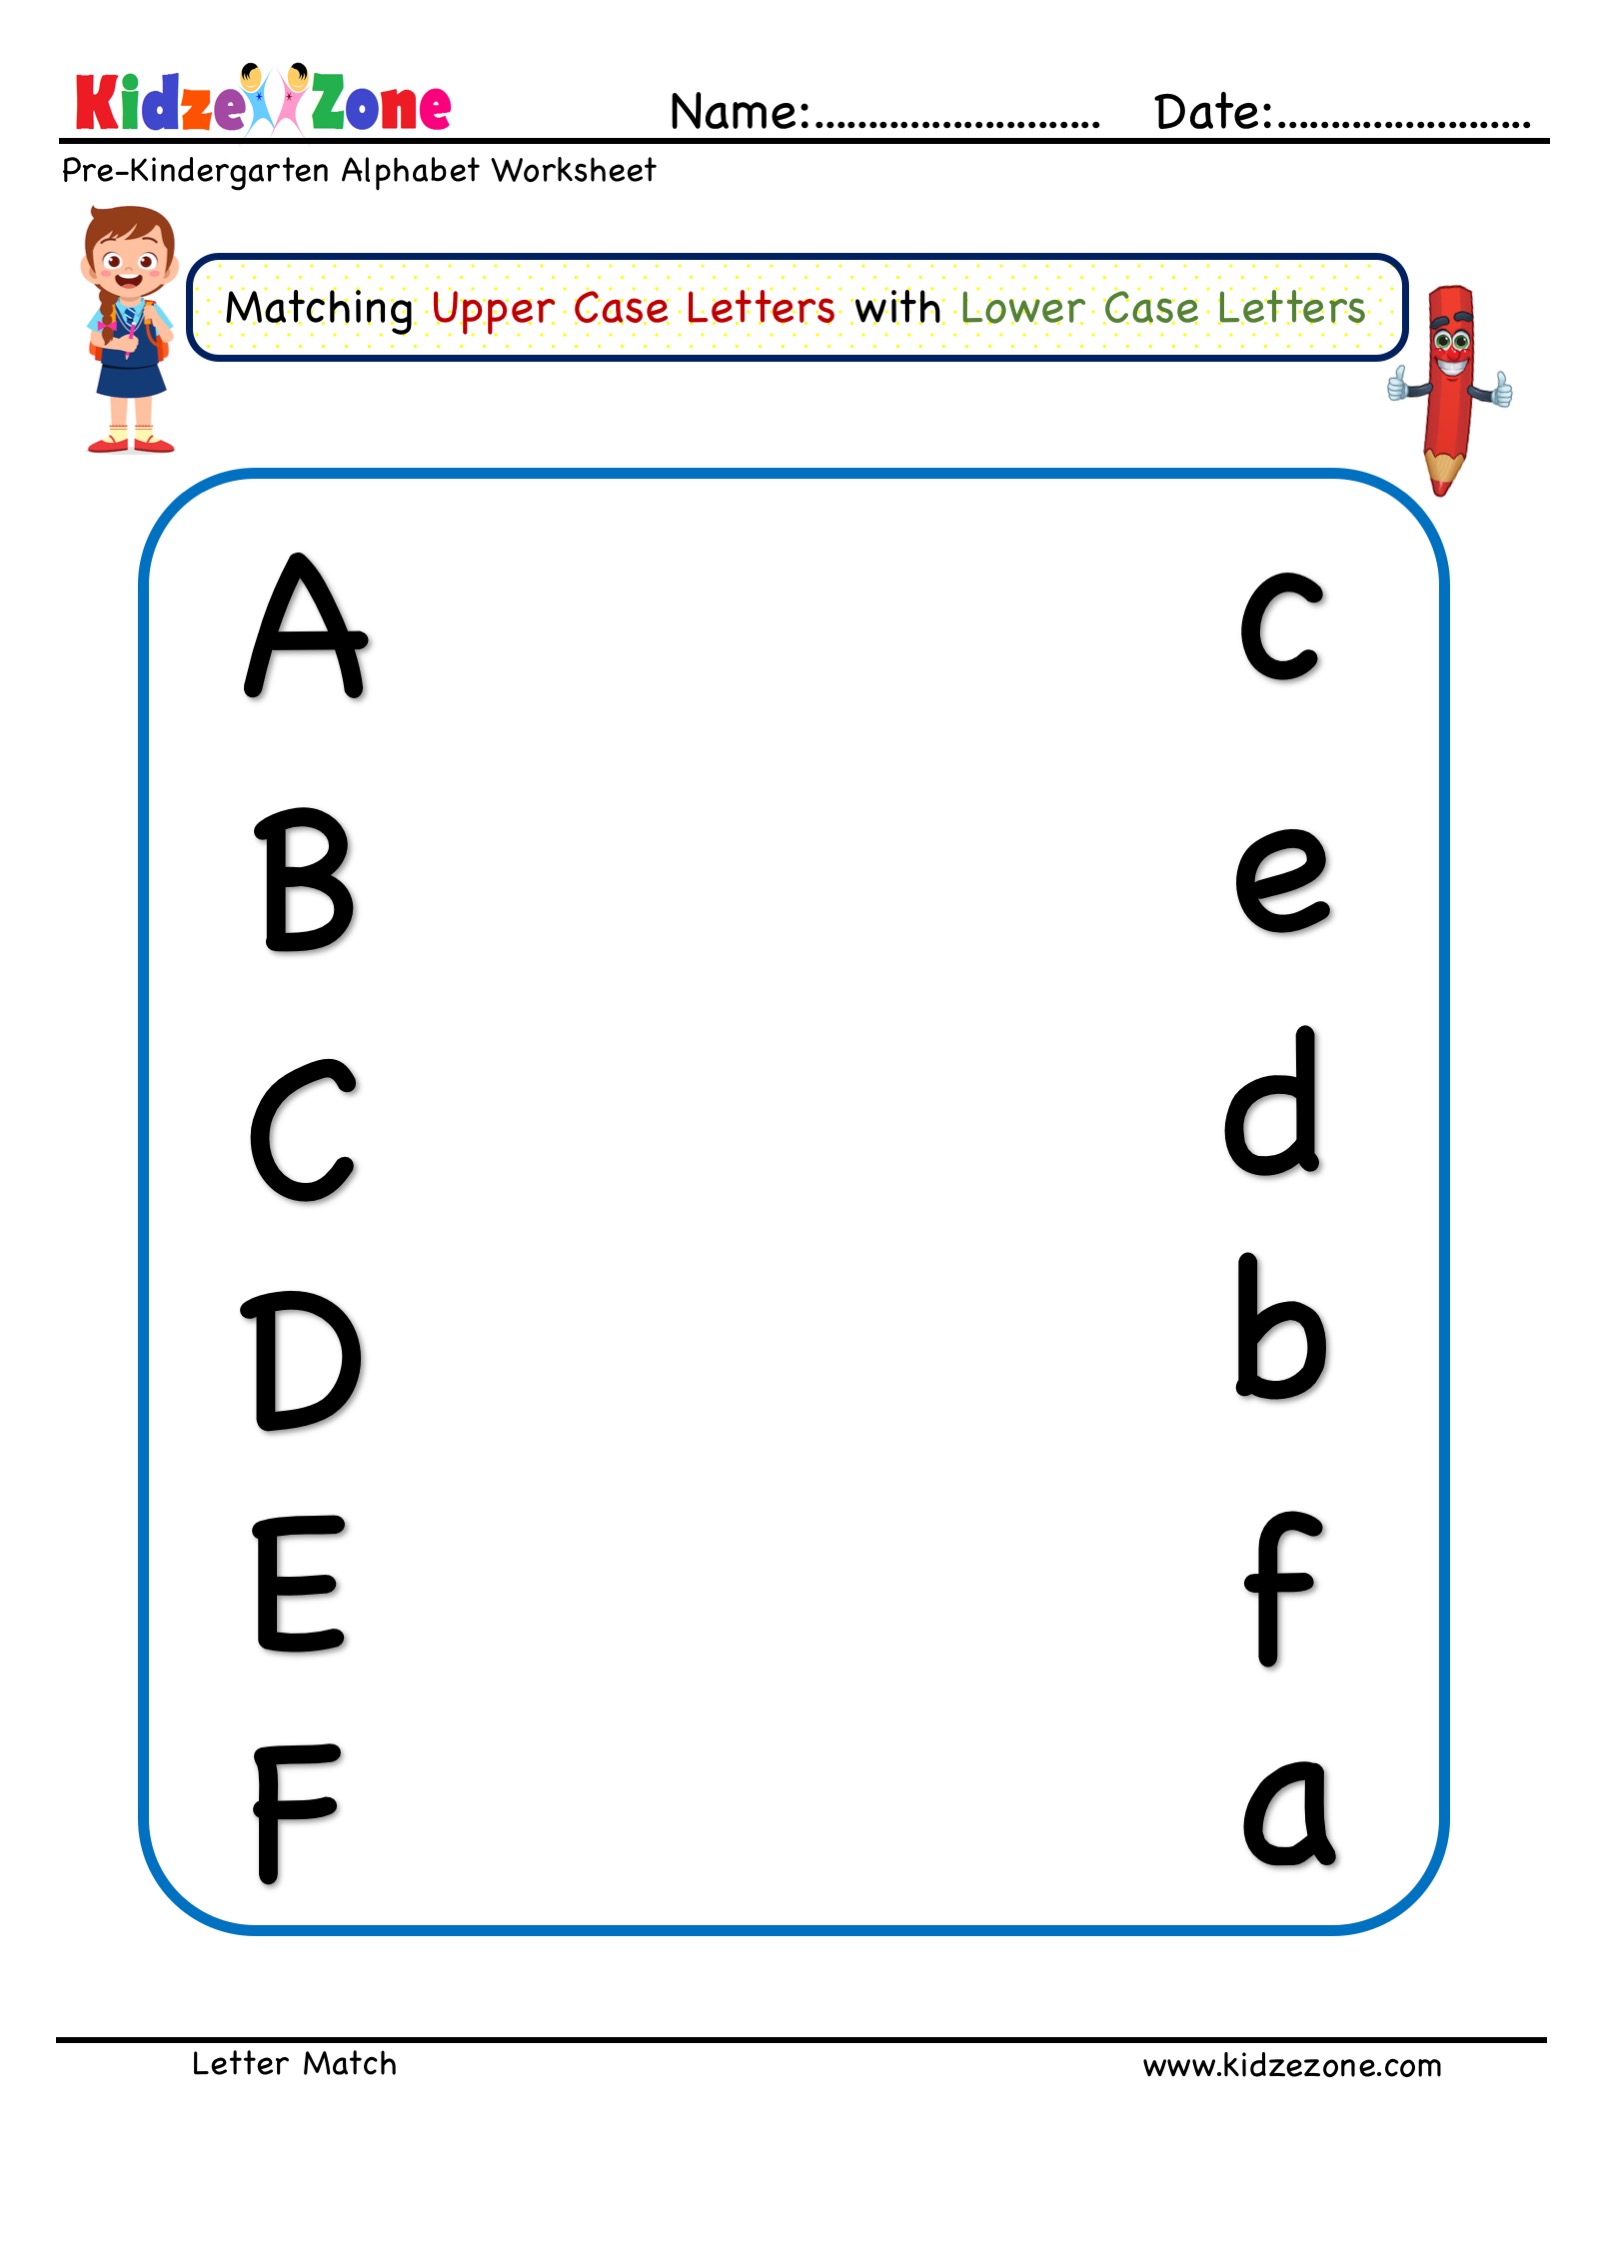 Preschool Letter Matching Upper Case to Lower Case A TO F